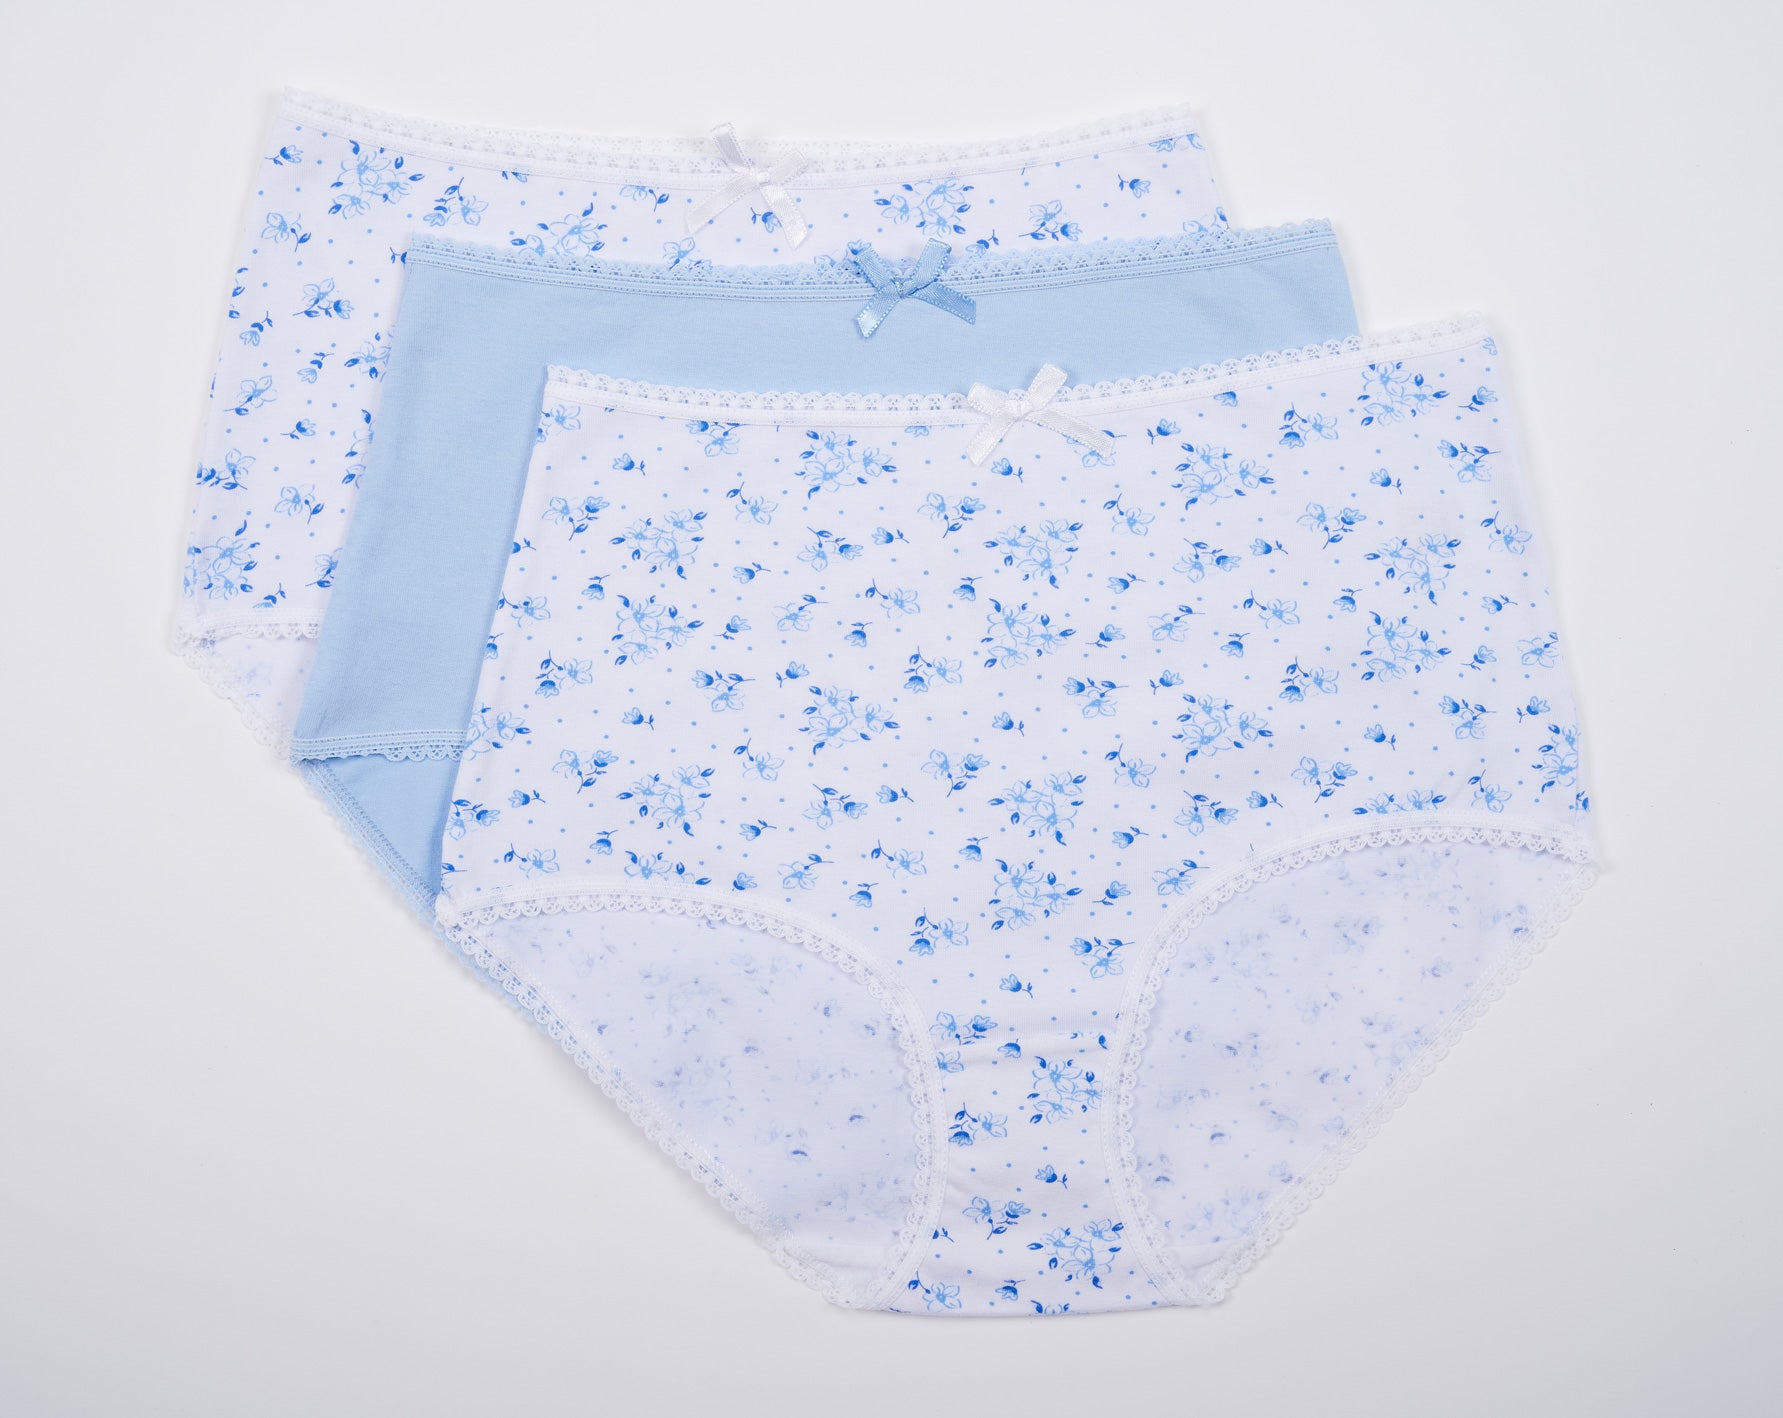 Slenders By Slenderella Cotton Comfort 3Pack Full Brief BF82